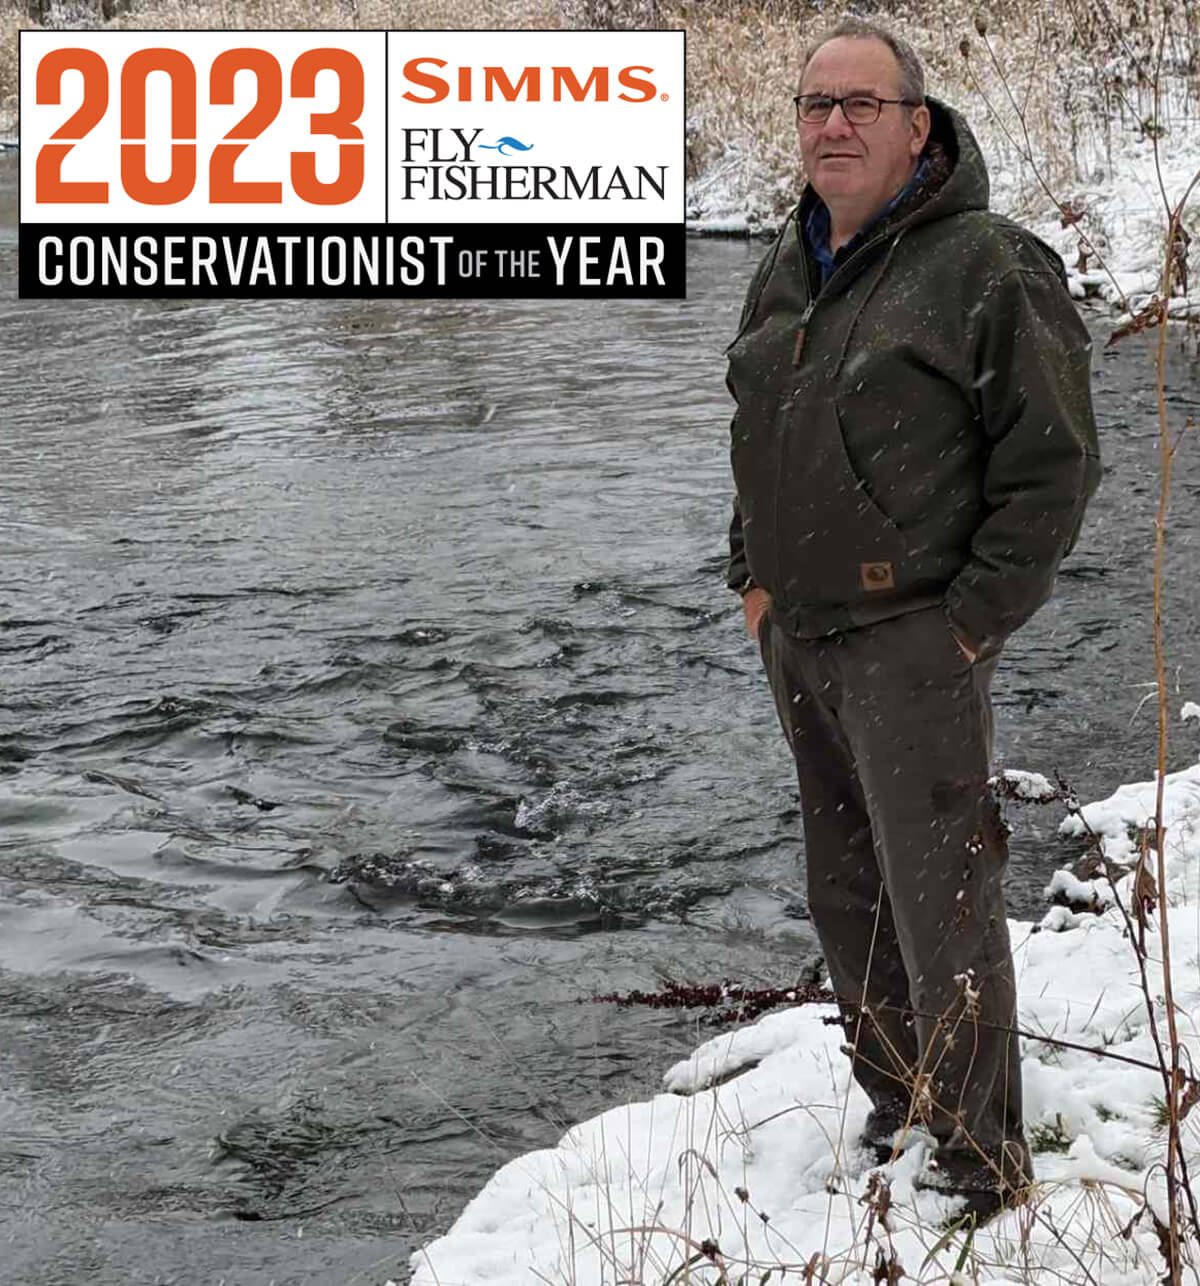 2023 Fly Fisherman Conservationist of the Year...